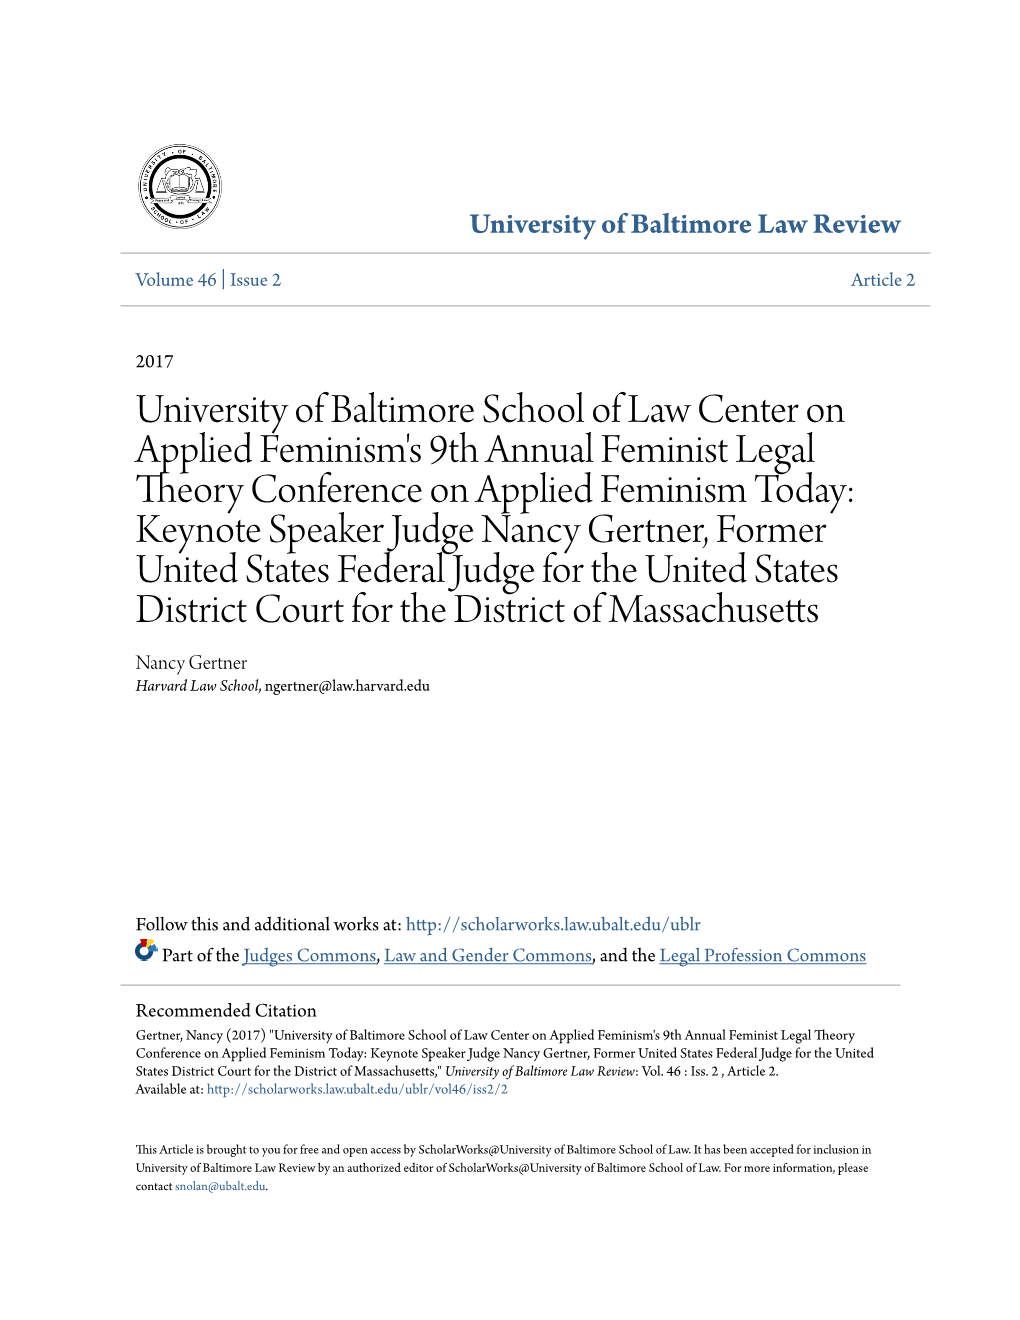 University of Baltimore School of Law Center on Applied Feminism's 9Th